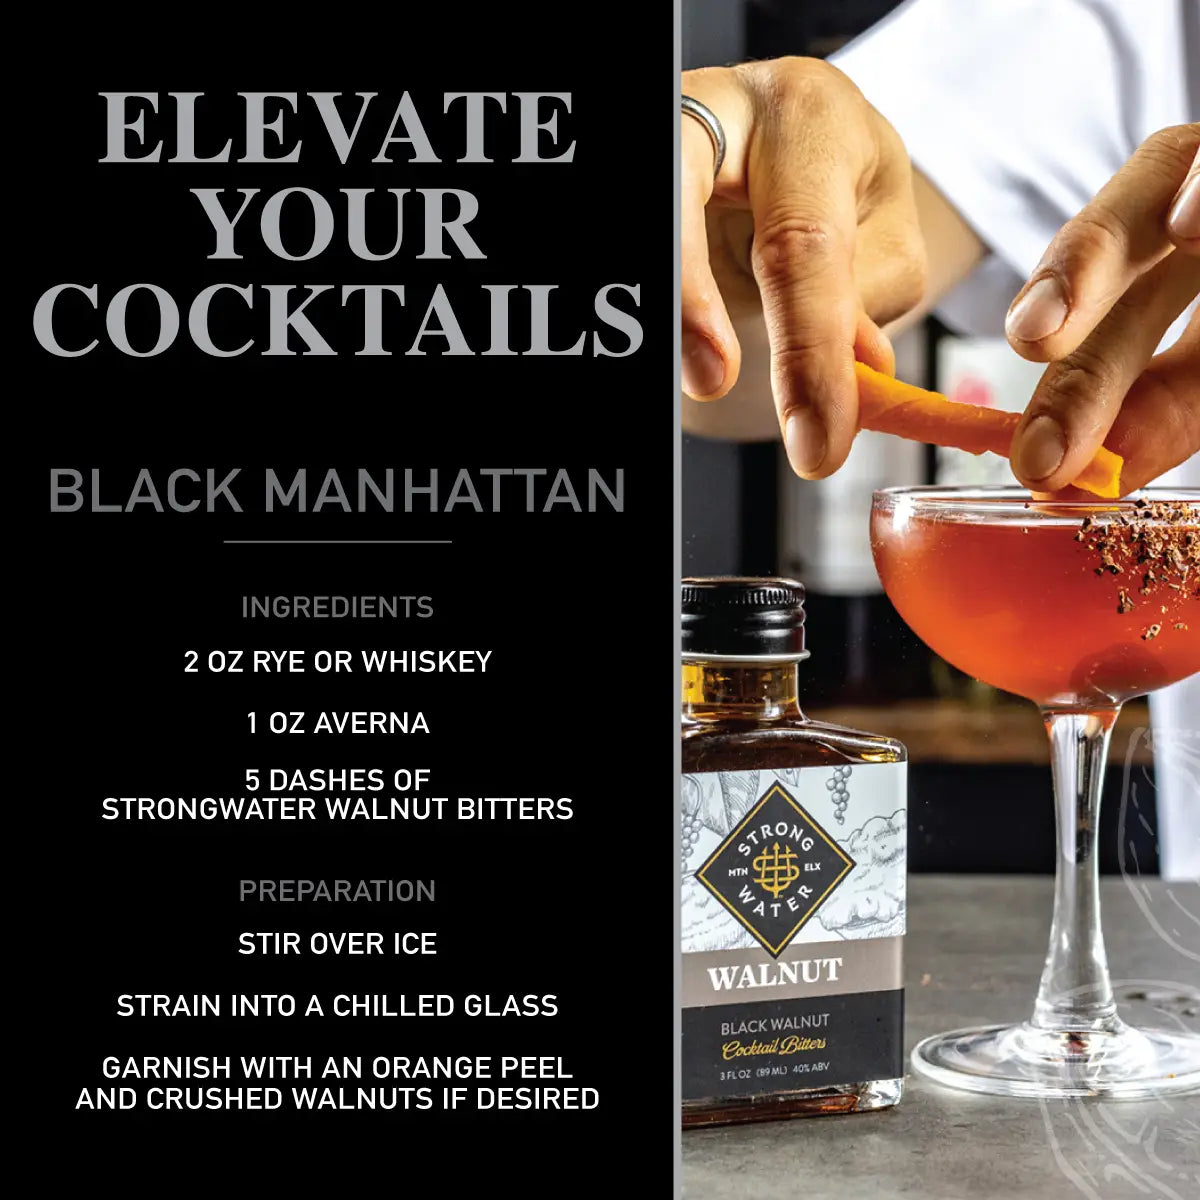 graphic of mans hands mixing a beverage on the right half, left half is black with white wording that reads "Elevate your cocktails, black manhattan" then gives the recipe for a black manhattan